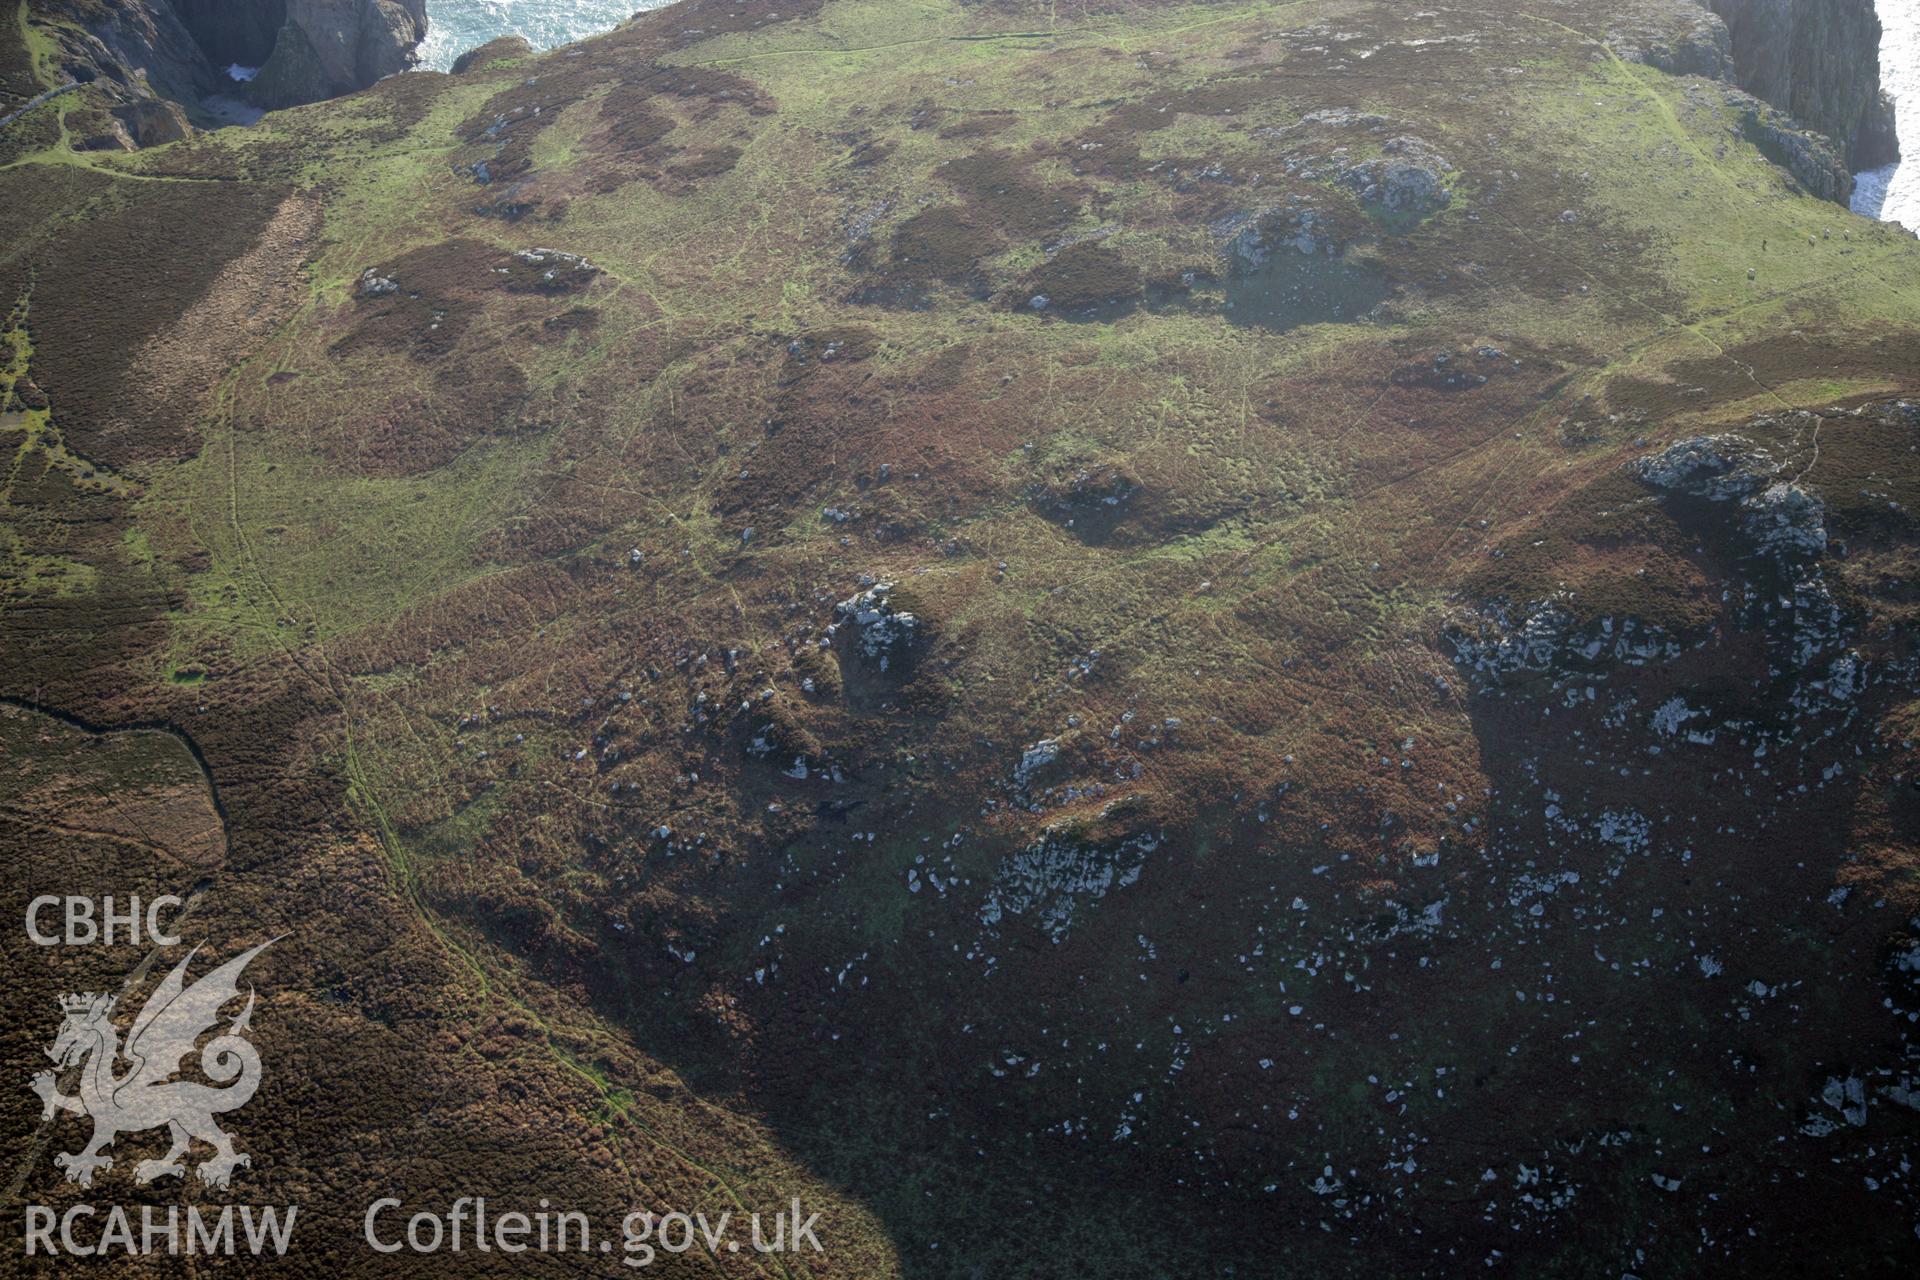 RCAHMW colour oblique photograph of relict field enclosure features, Ramsey Island. Taken by O. Davies & T. Driver on 22/11/2013.